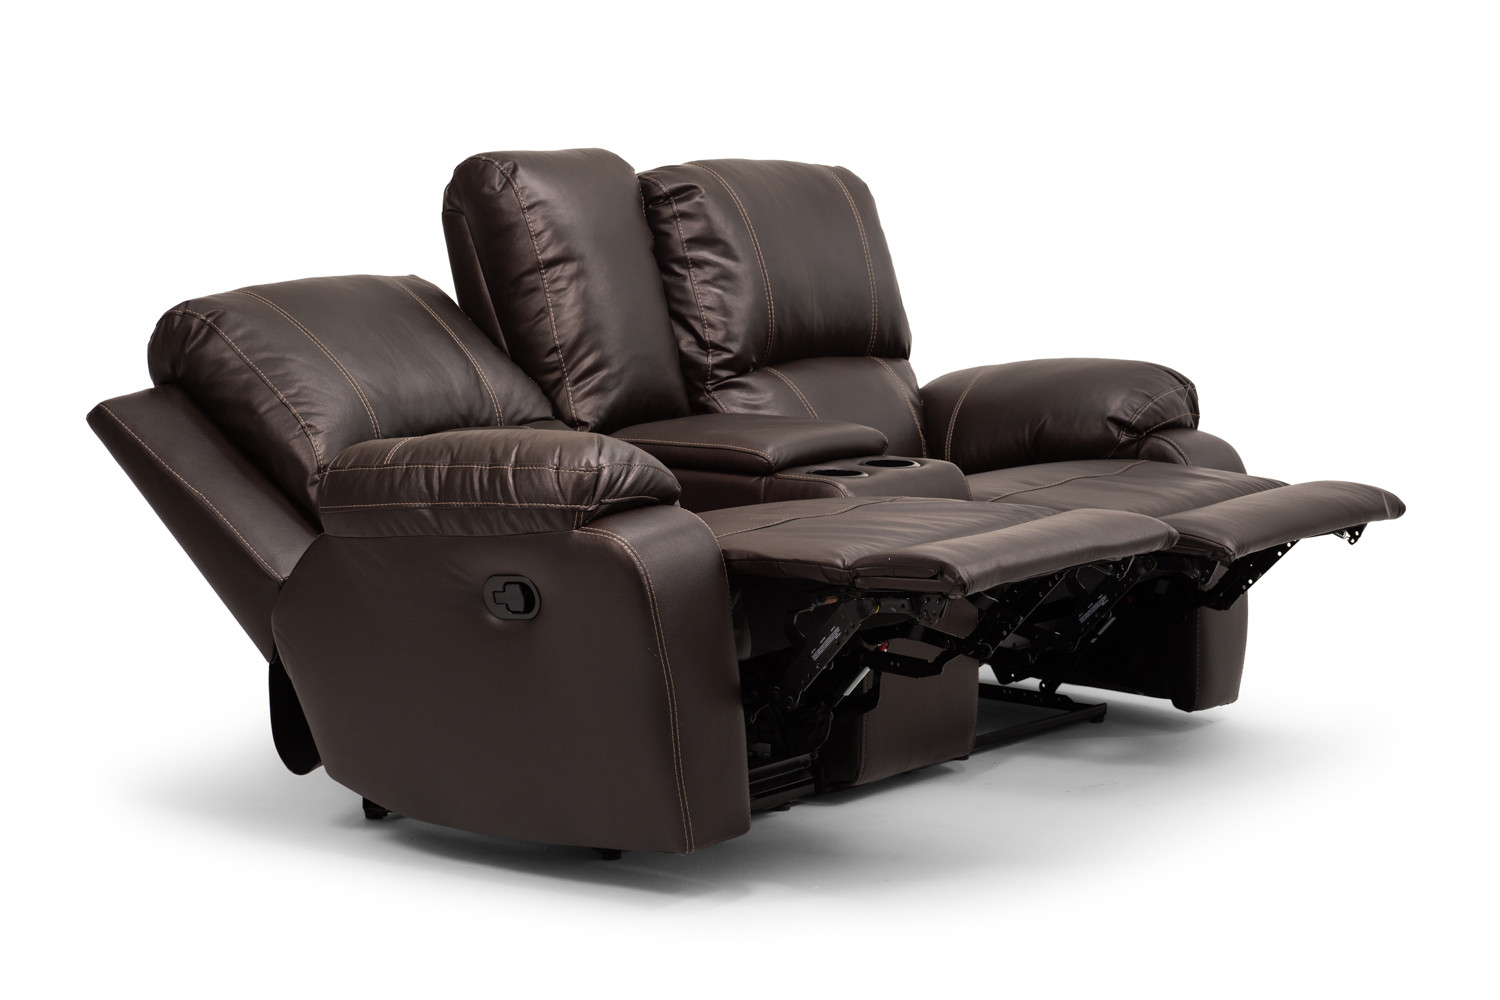 Charlton 2 Seater Leather Cinema Recliner - Brown Recliner Couches - 3